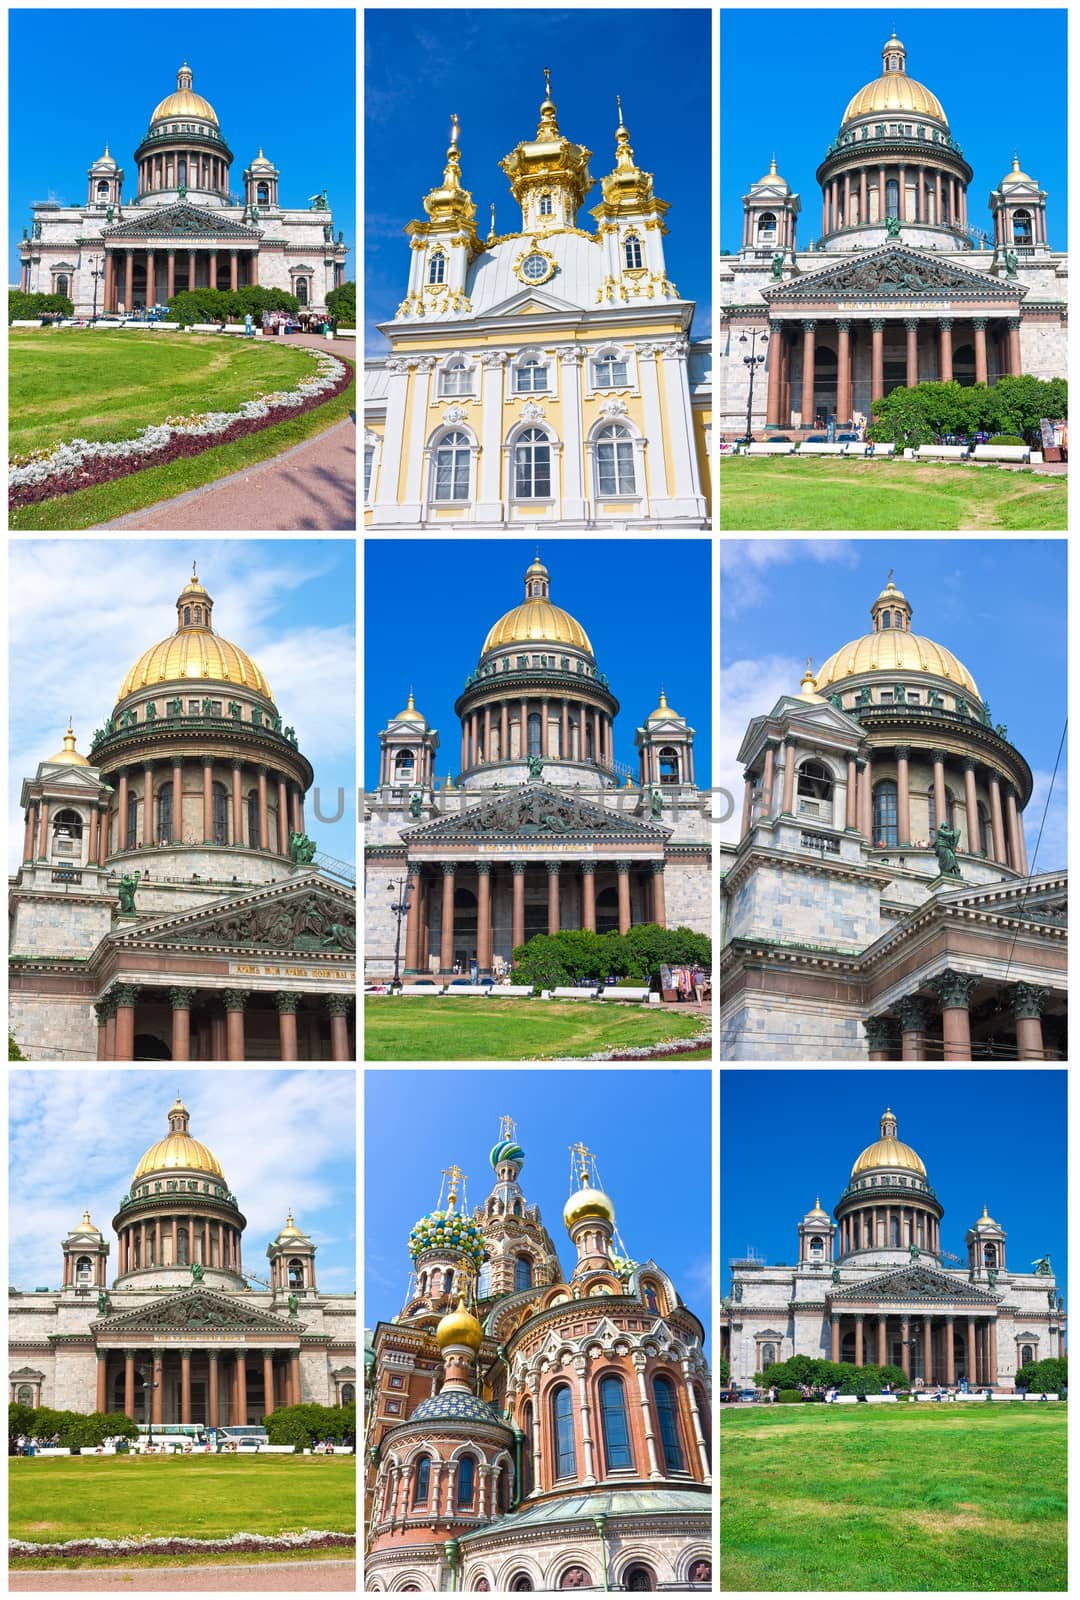 Collection of Cathedrals and Churches in Saint Petersburg, Russia